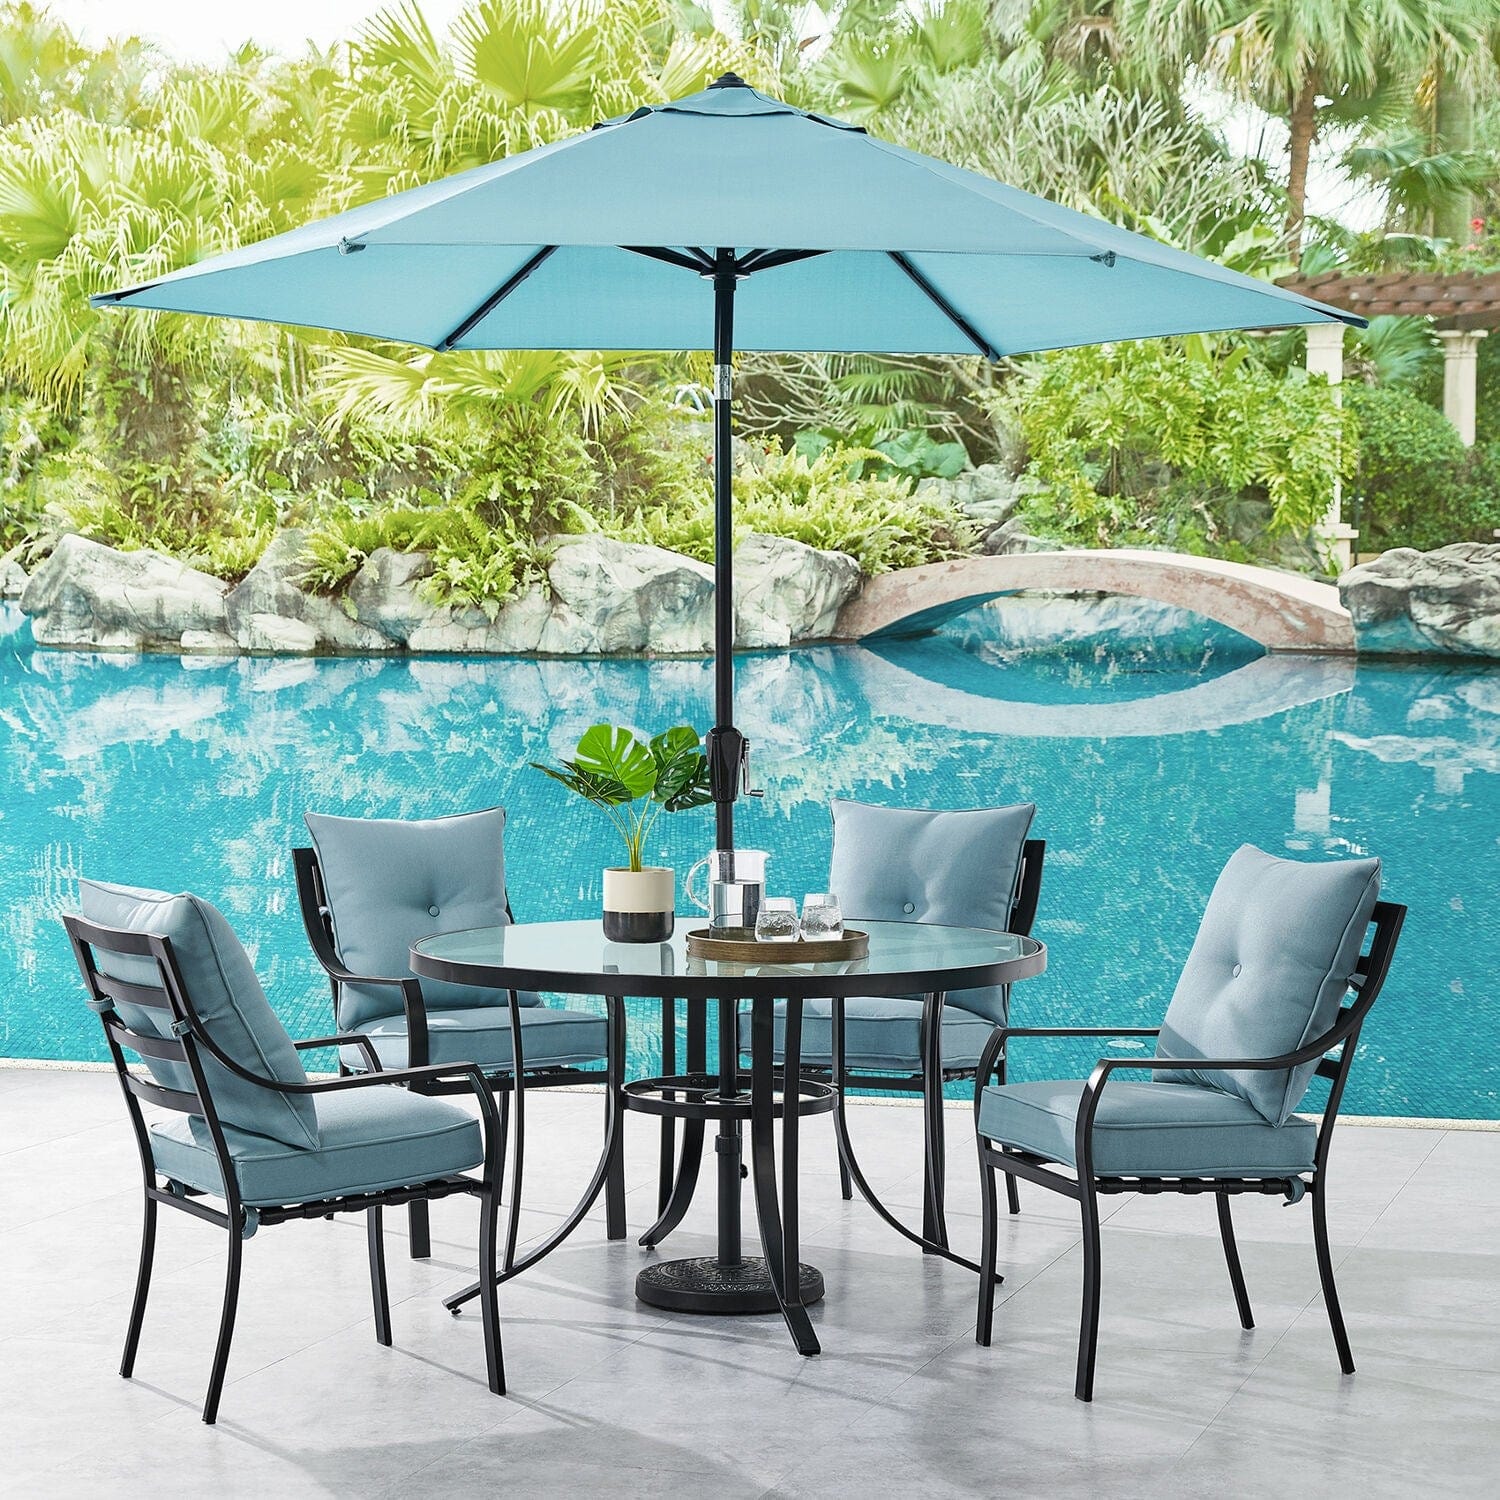 Hanover Outdoor Dining Set Hanover Lavallette 5-Piece Dining Set in Ocean Blue with 4 Stationary Chairs, 52-In. Round Glass-Top Table, Umbrella, and Base | LAVDN5PCRD-BLU-SU